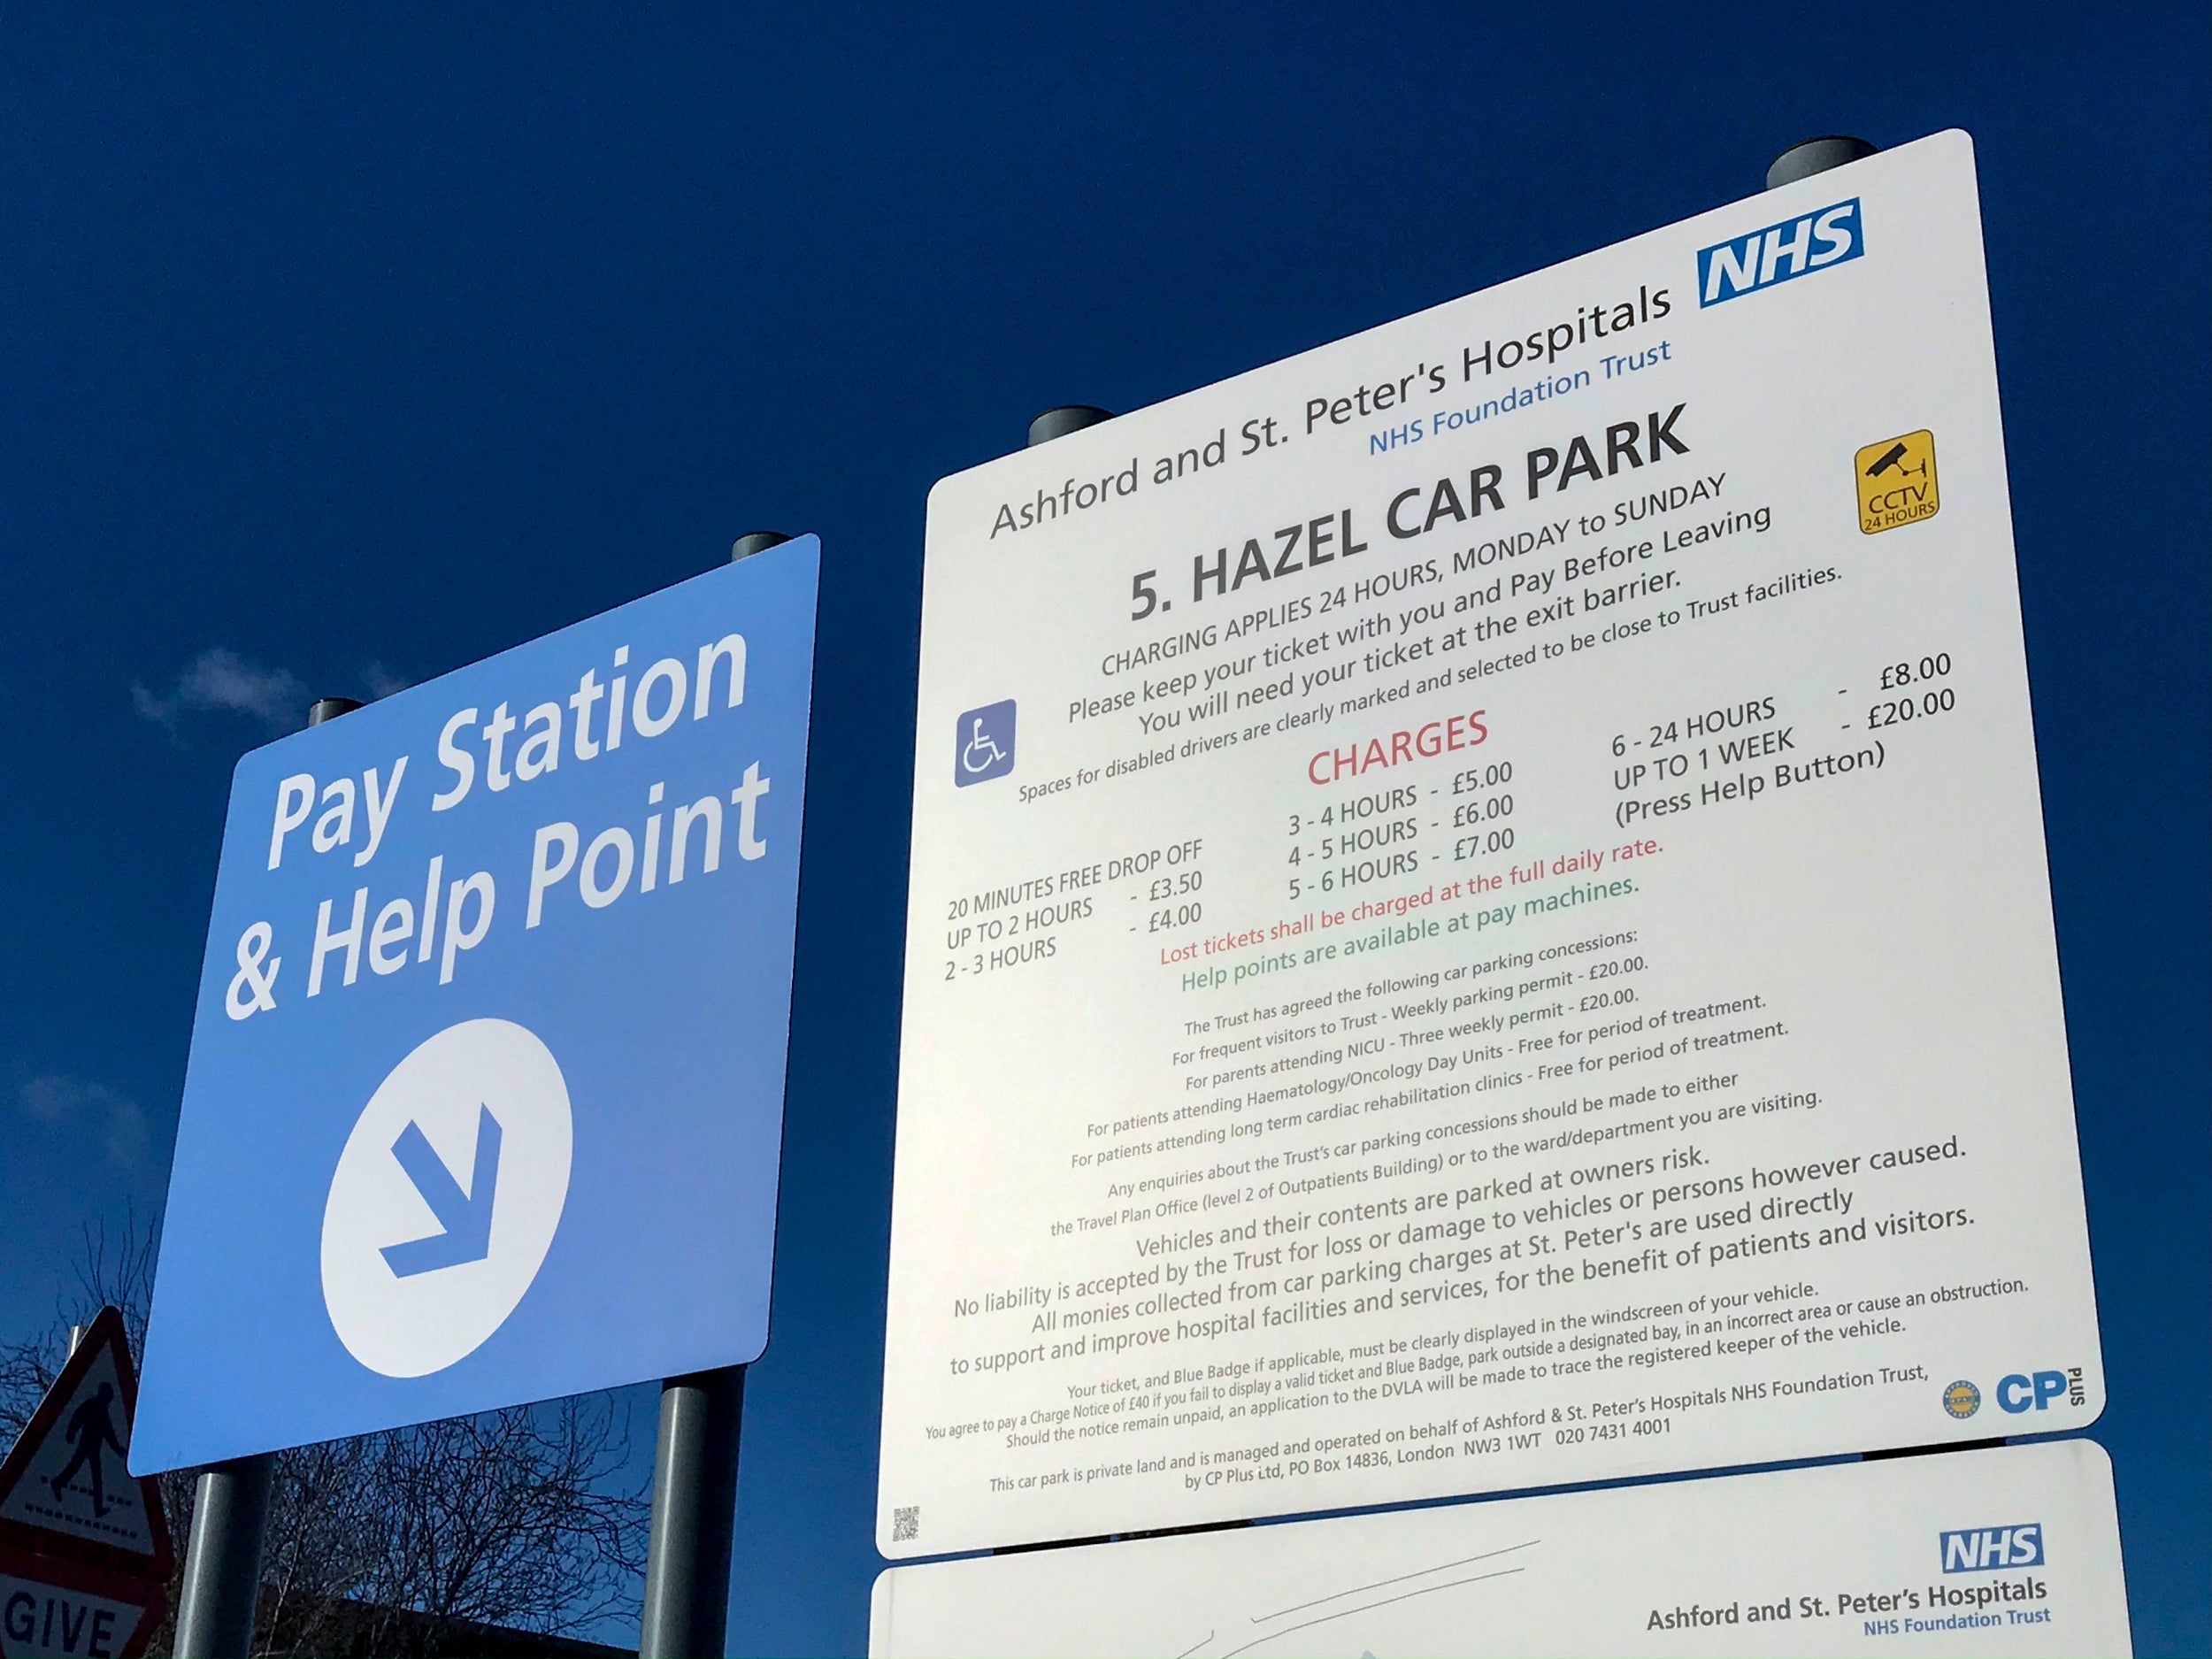 The policy will be for patients with long-term conditions and blue badge holders